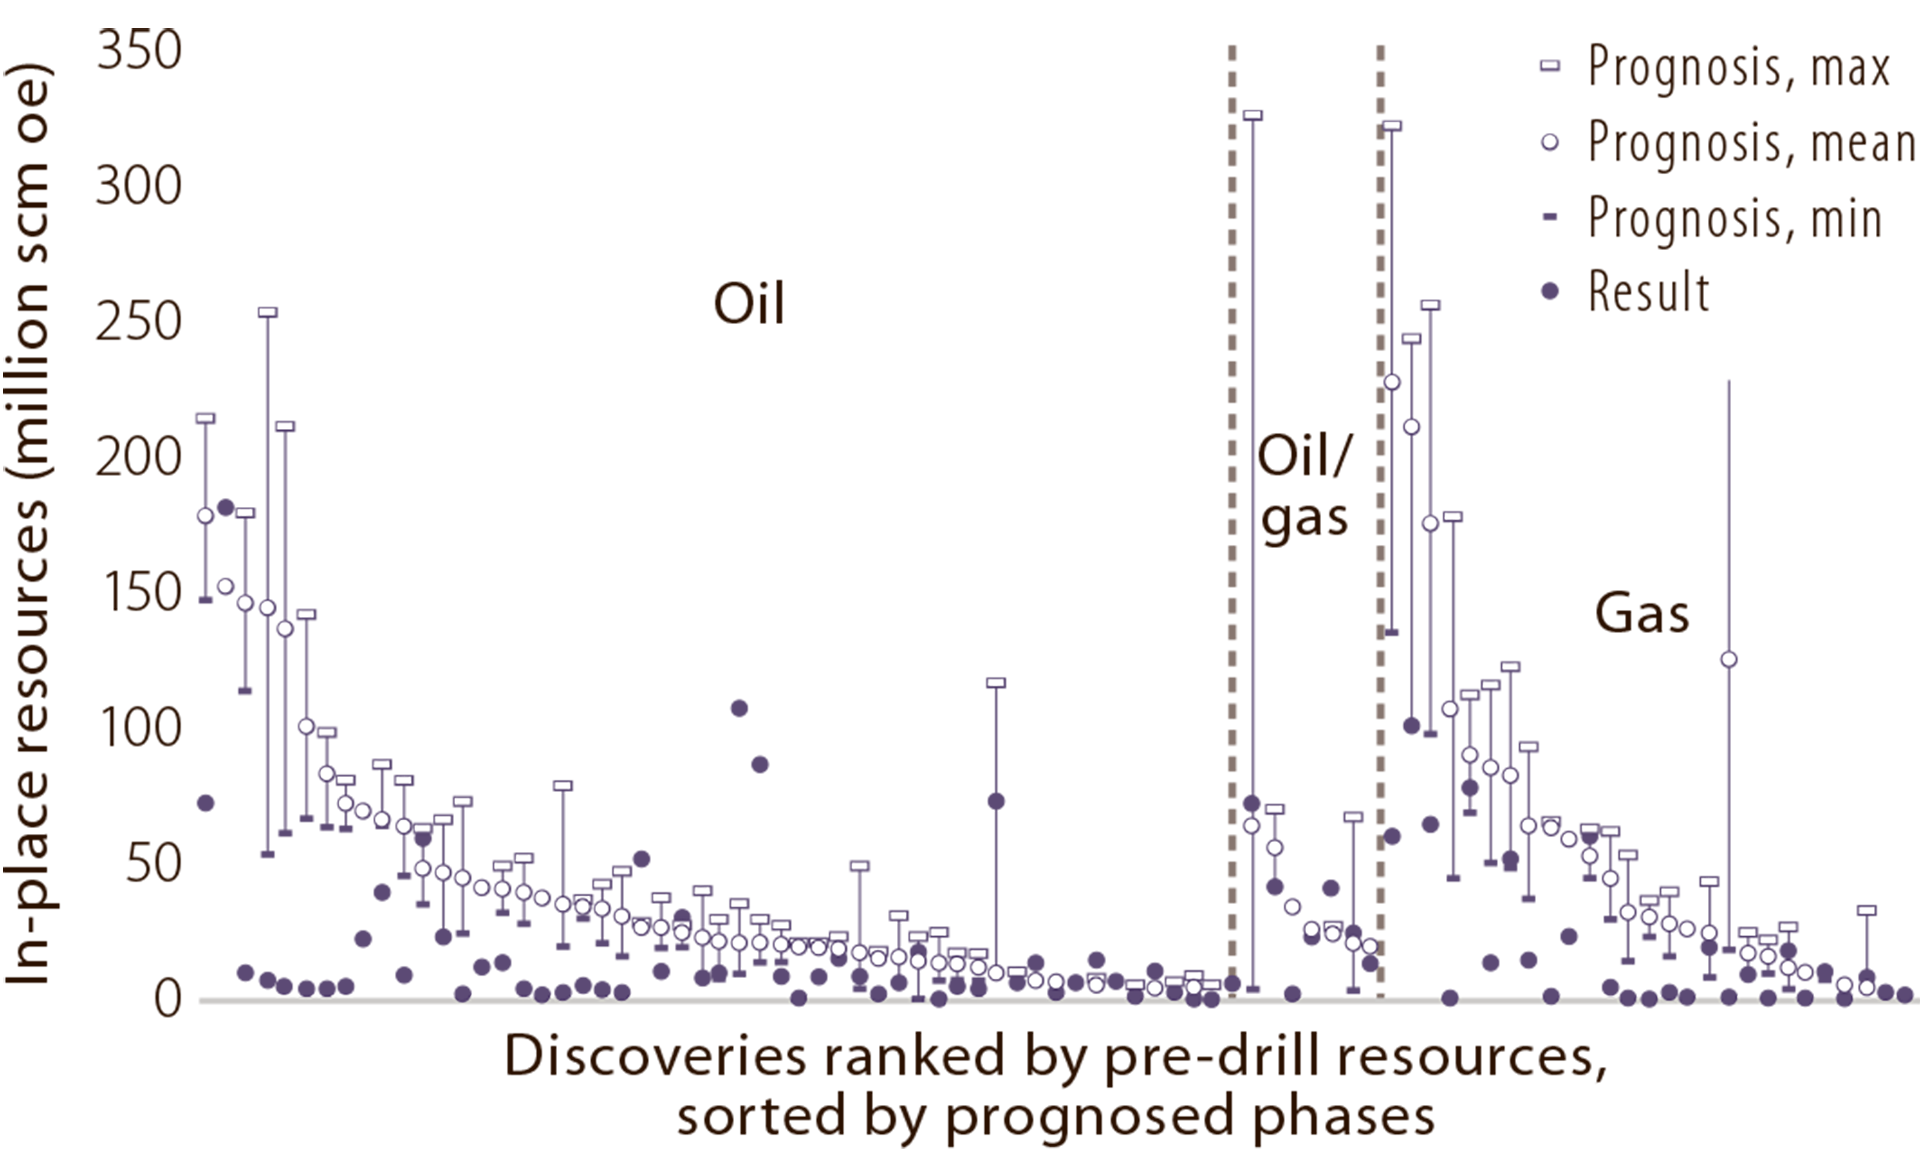 Figure 7.3 Pre-drilling resource estimates from the companies compared with actual discovery size (195 wildcats drilled in 1990-97). Source: Ofstad, Kullerud and Helliksen (2000).15